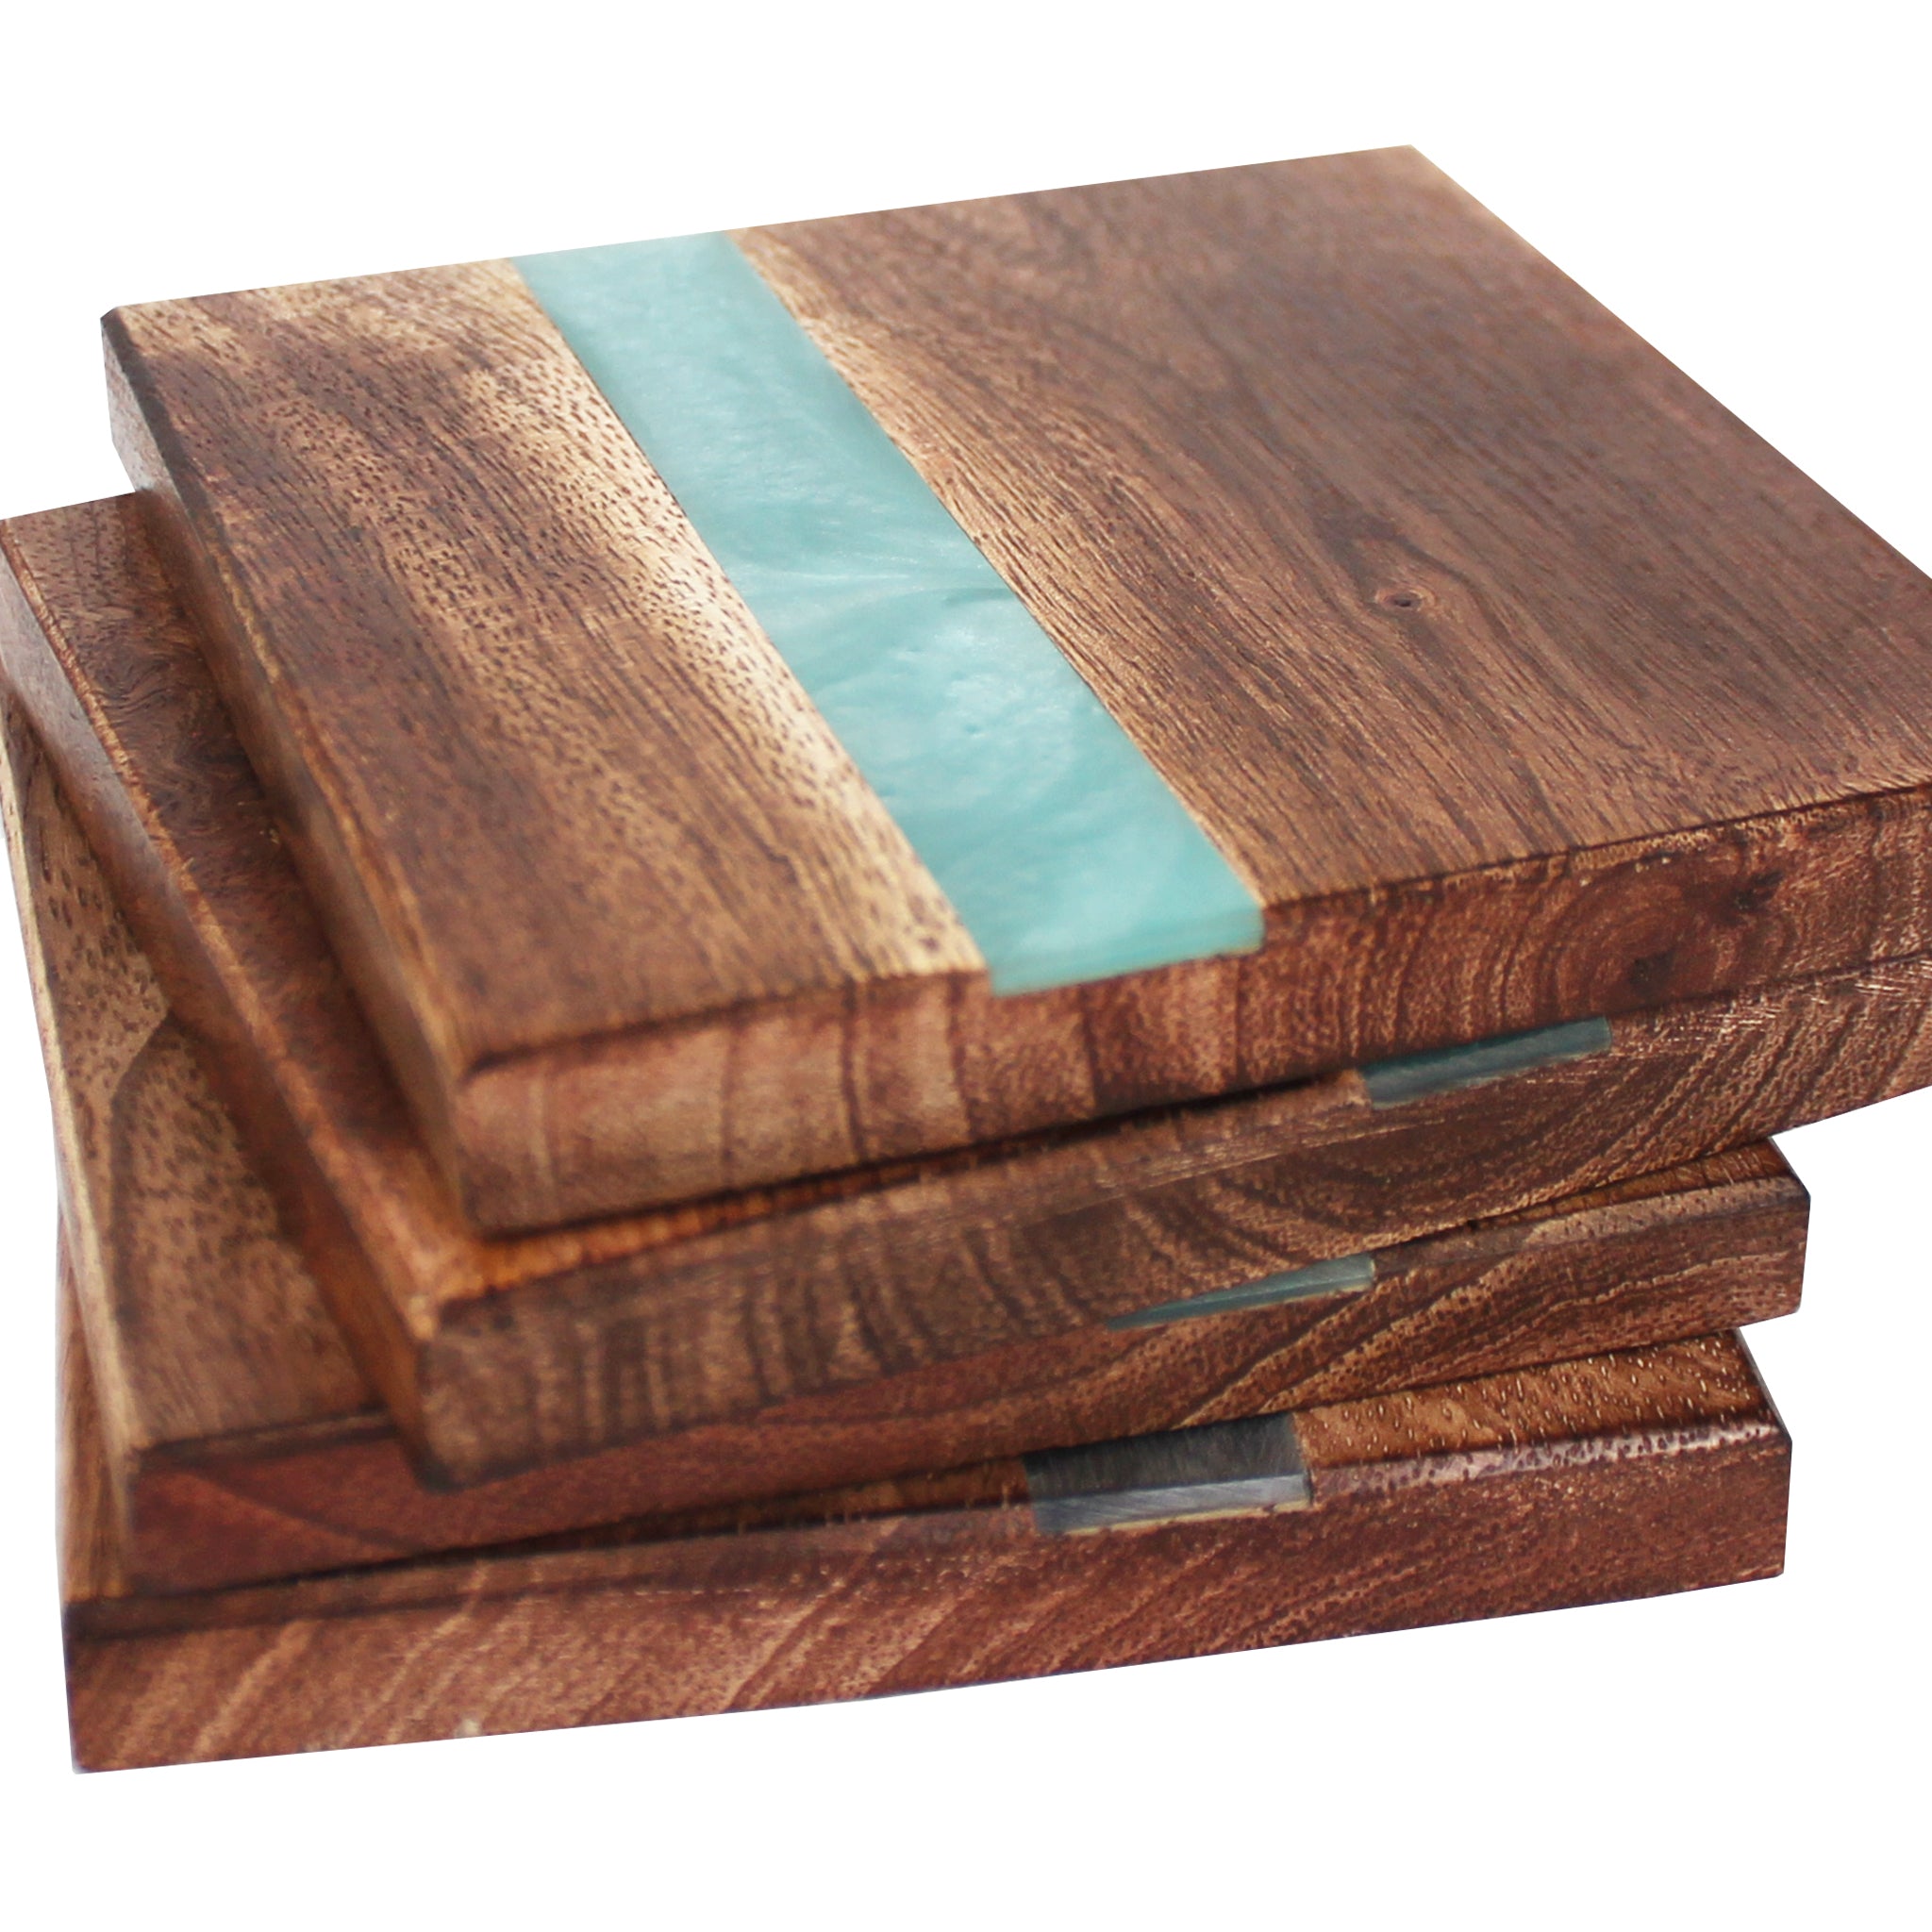 Linen by Trunkin'/ Wood with resin Coaster Set of 4 / Aqua/ 4"